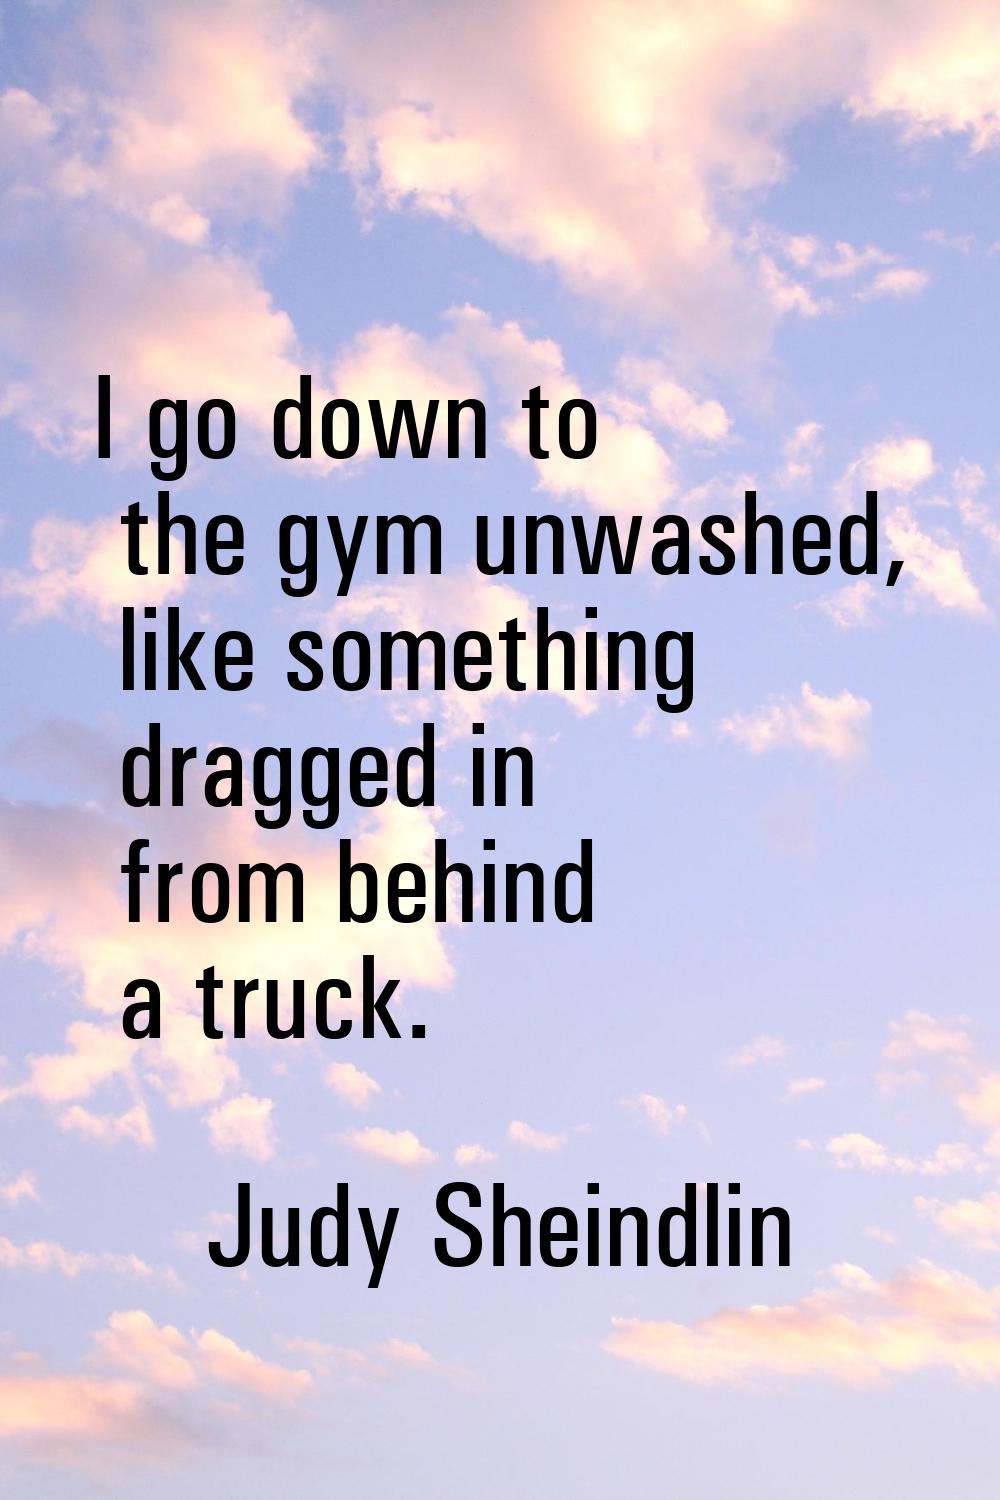 I go down to the gym unwashed, like something dragged in from behind a truck.